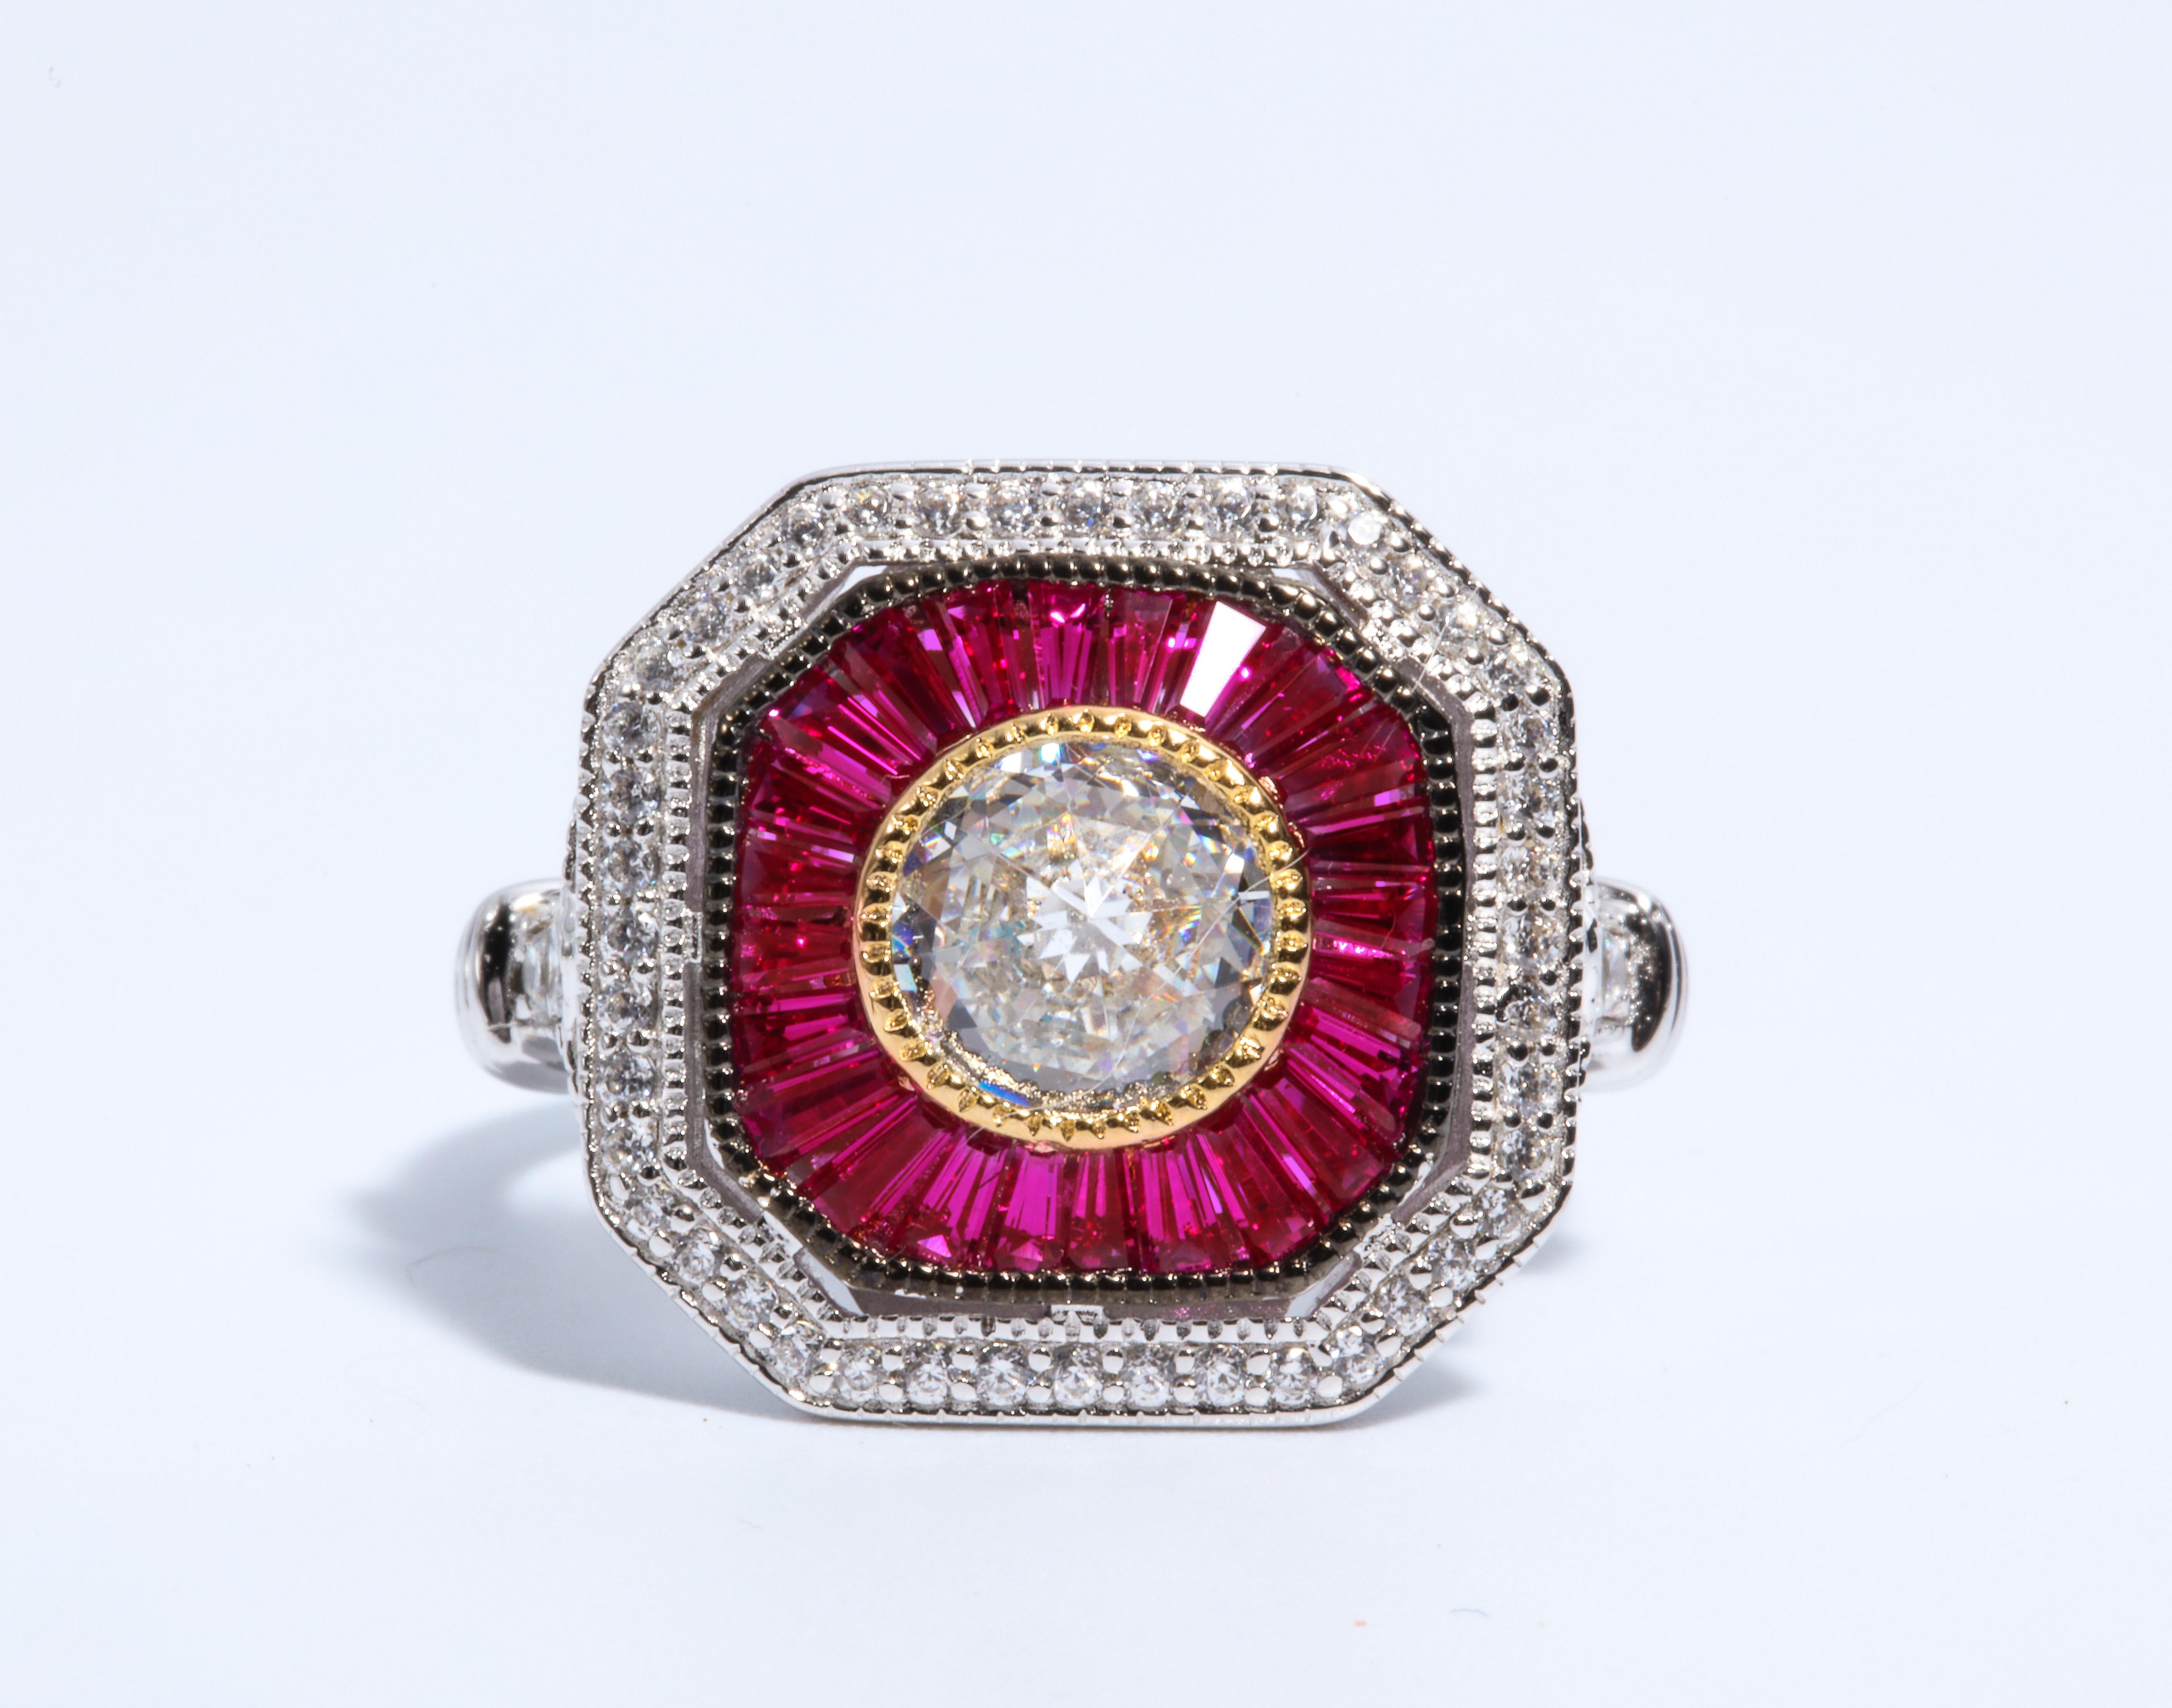 Magnificent Costume Jewelry Art Deco Style Diamond Ruby Sterling Ring set with a Round CZ Surrounded by Tapered Synthetic Baguette Rubies  set in non-tarnish Sterling free sizing.